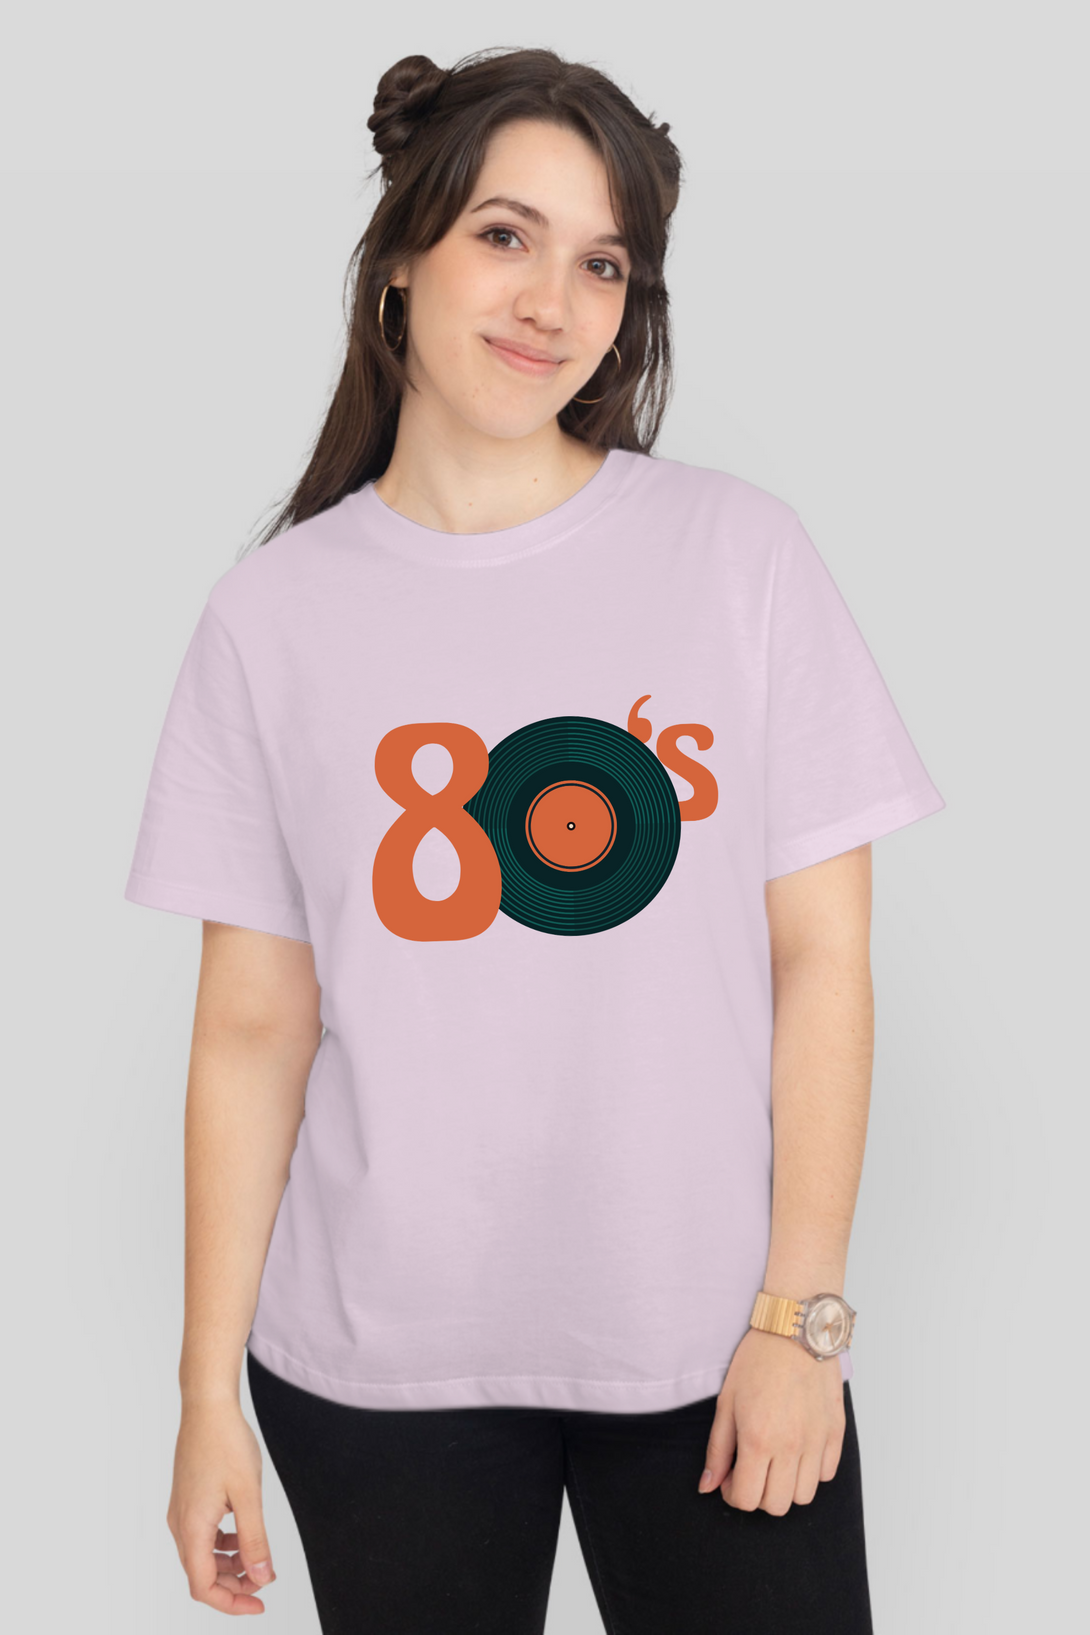 Retro Groove Printed T-Shirt For Women - WowWaves - 9